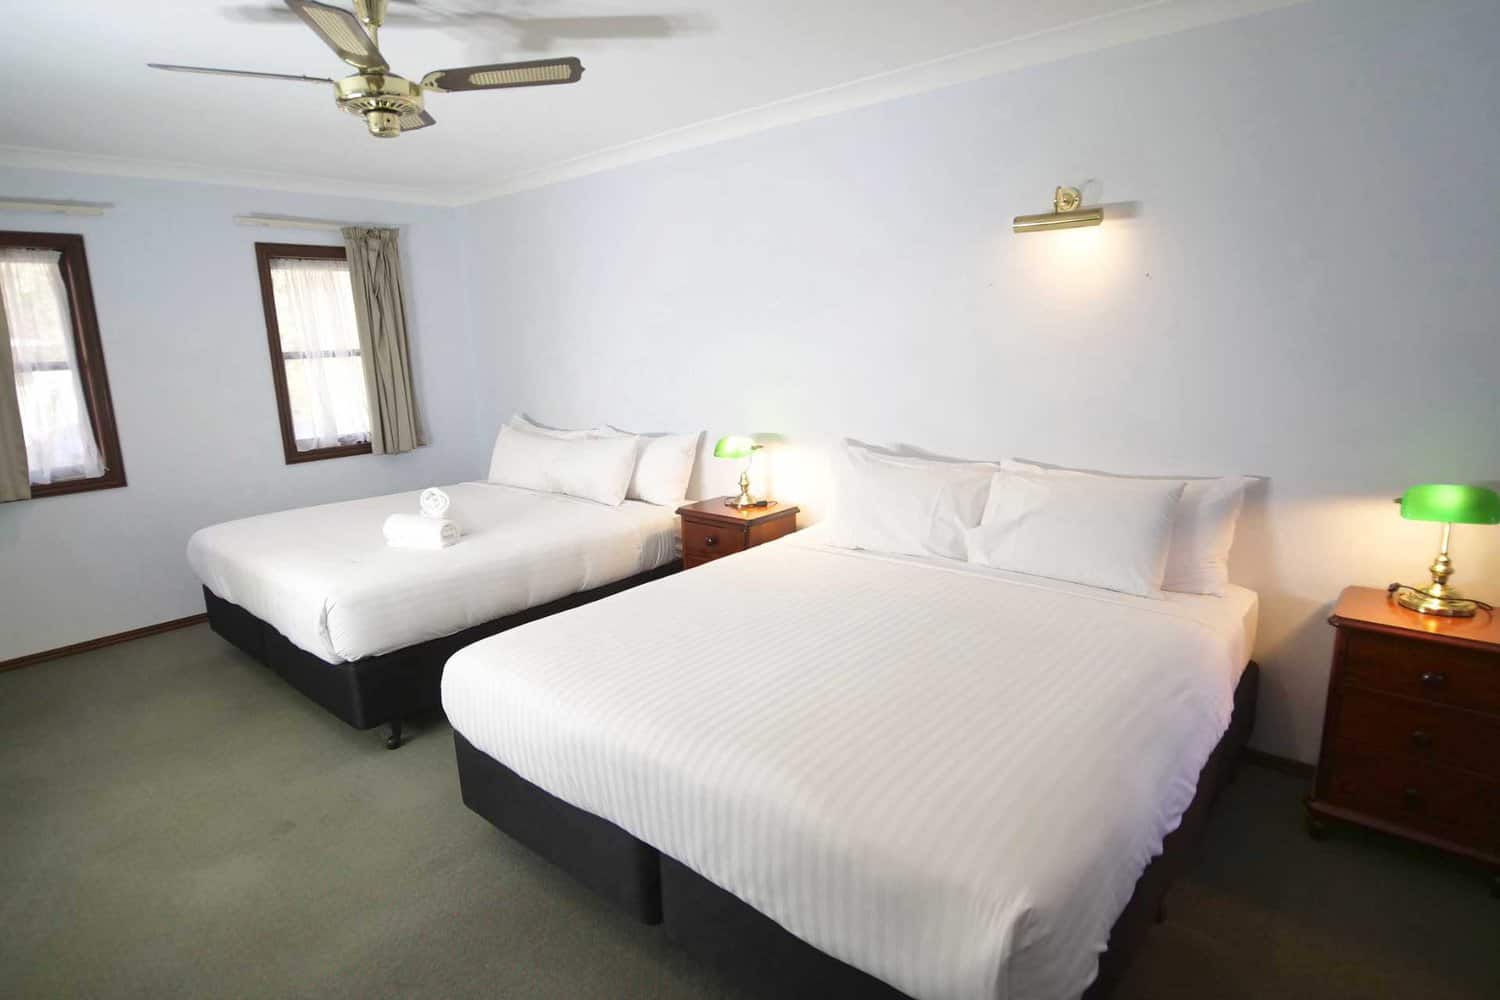 A well-lit, clean hotel room with two queen-sized beds, white bedding, side tables with lamps, and a ceiling fan, offering a cozy and inviting atmosphere.